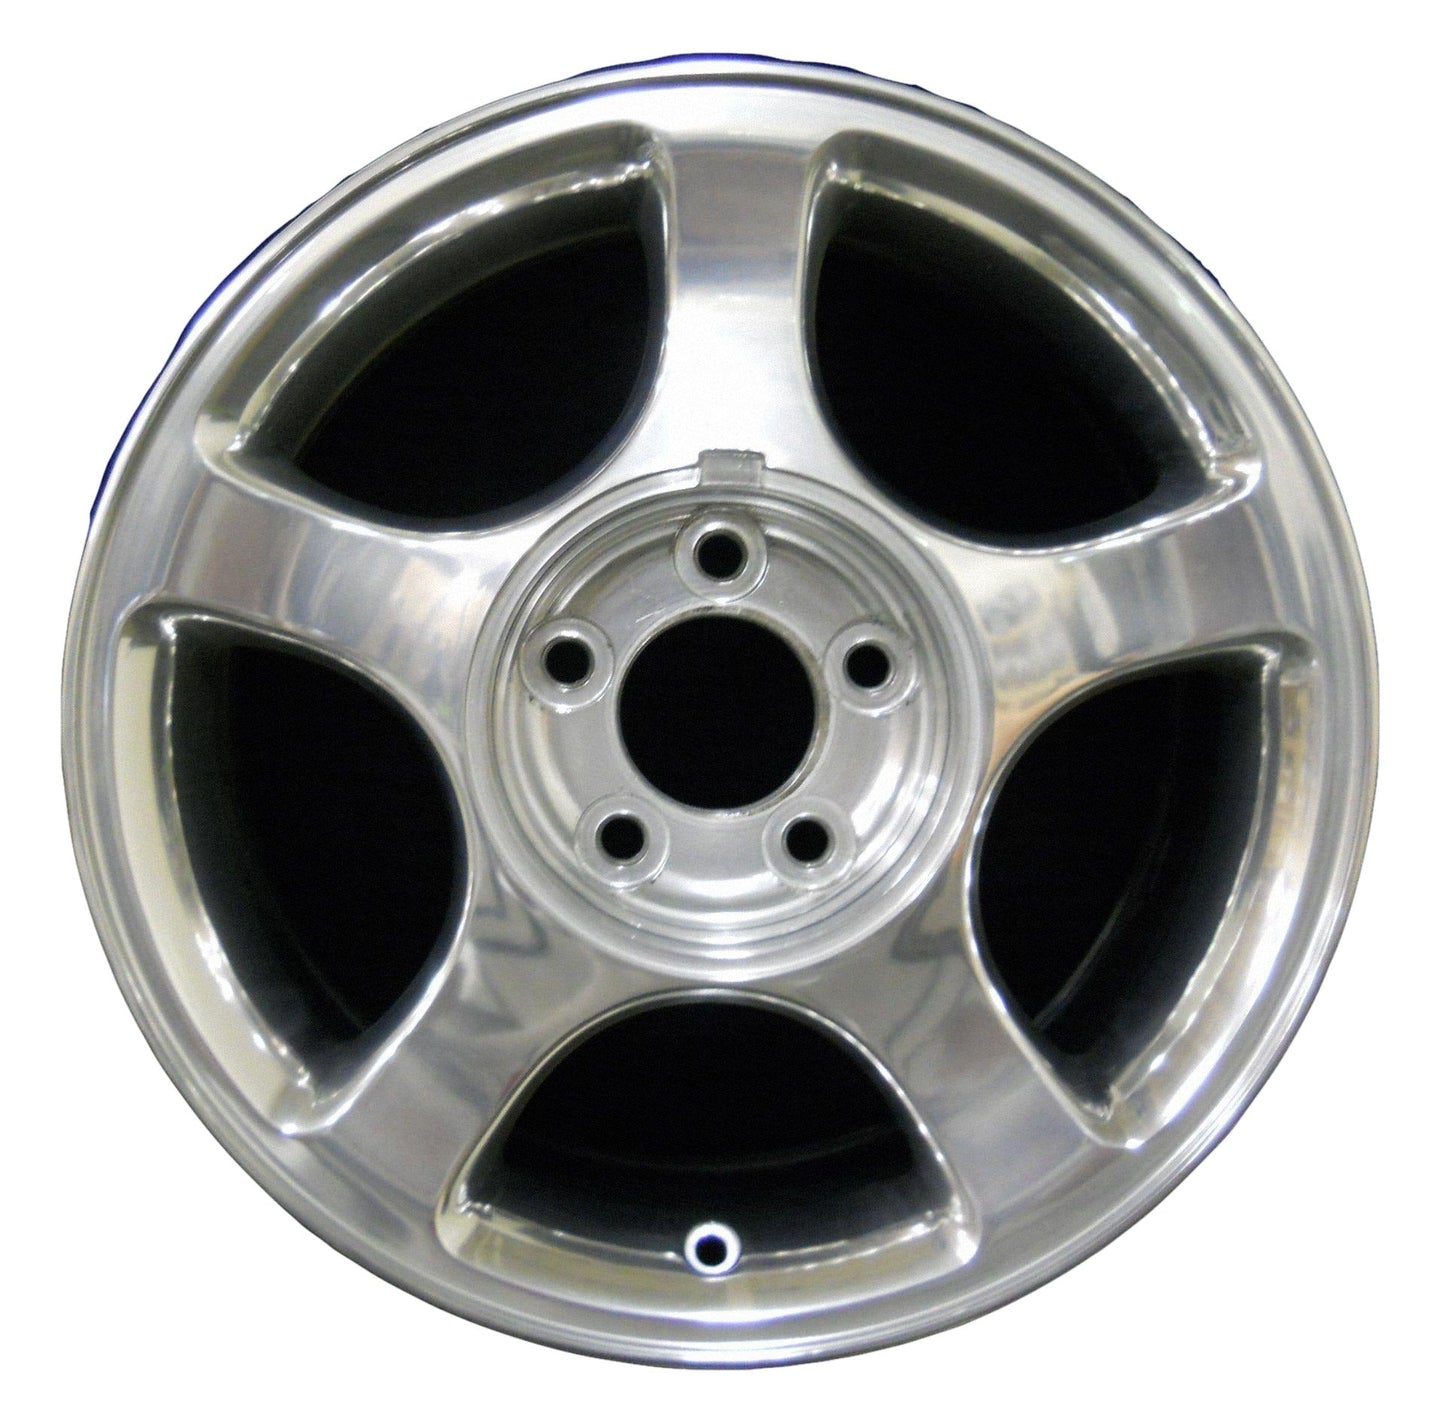 Ford Mustang  2000, 2001, 2002, 2003, 2004 Factory OEM Car Wheel Size 16x7.5 Alloy WAO.3375A.FULL.POL